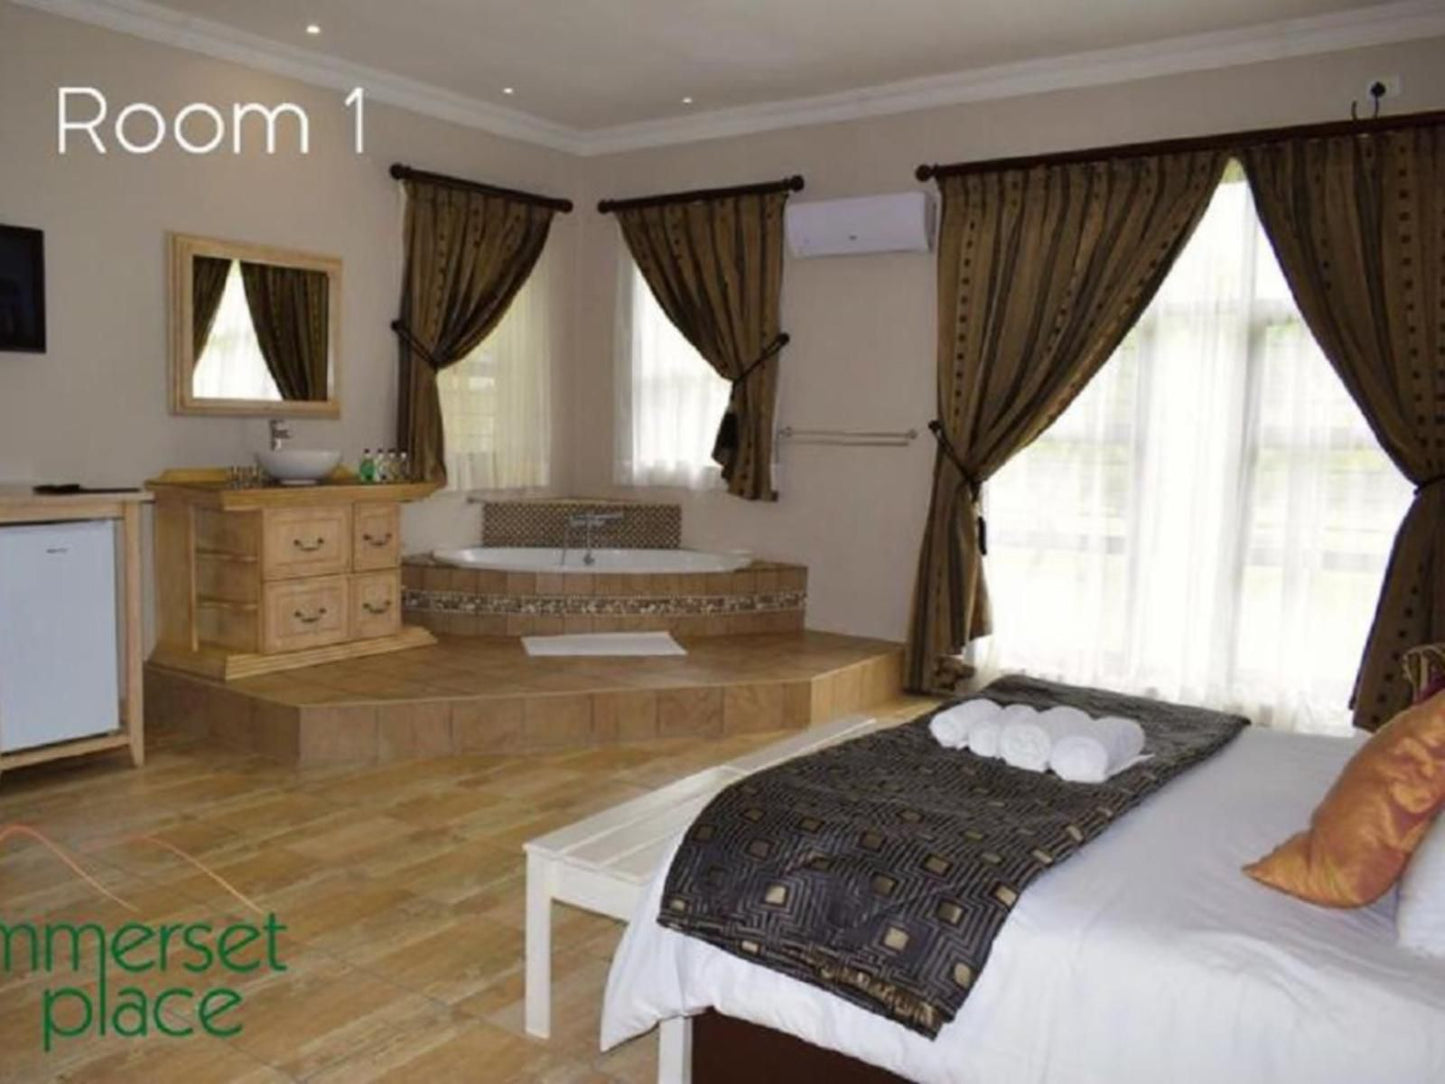 Summerset Place Country House Intaba Indle Wilderness Estate Bela Bela Warmbaths Limpopo Province South Africa Bedroom